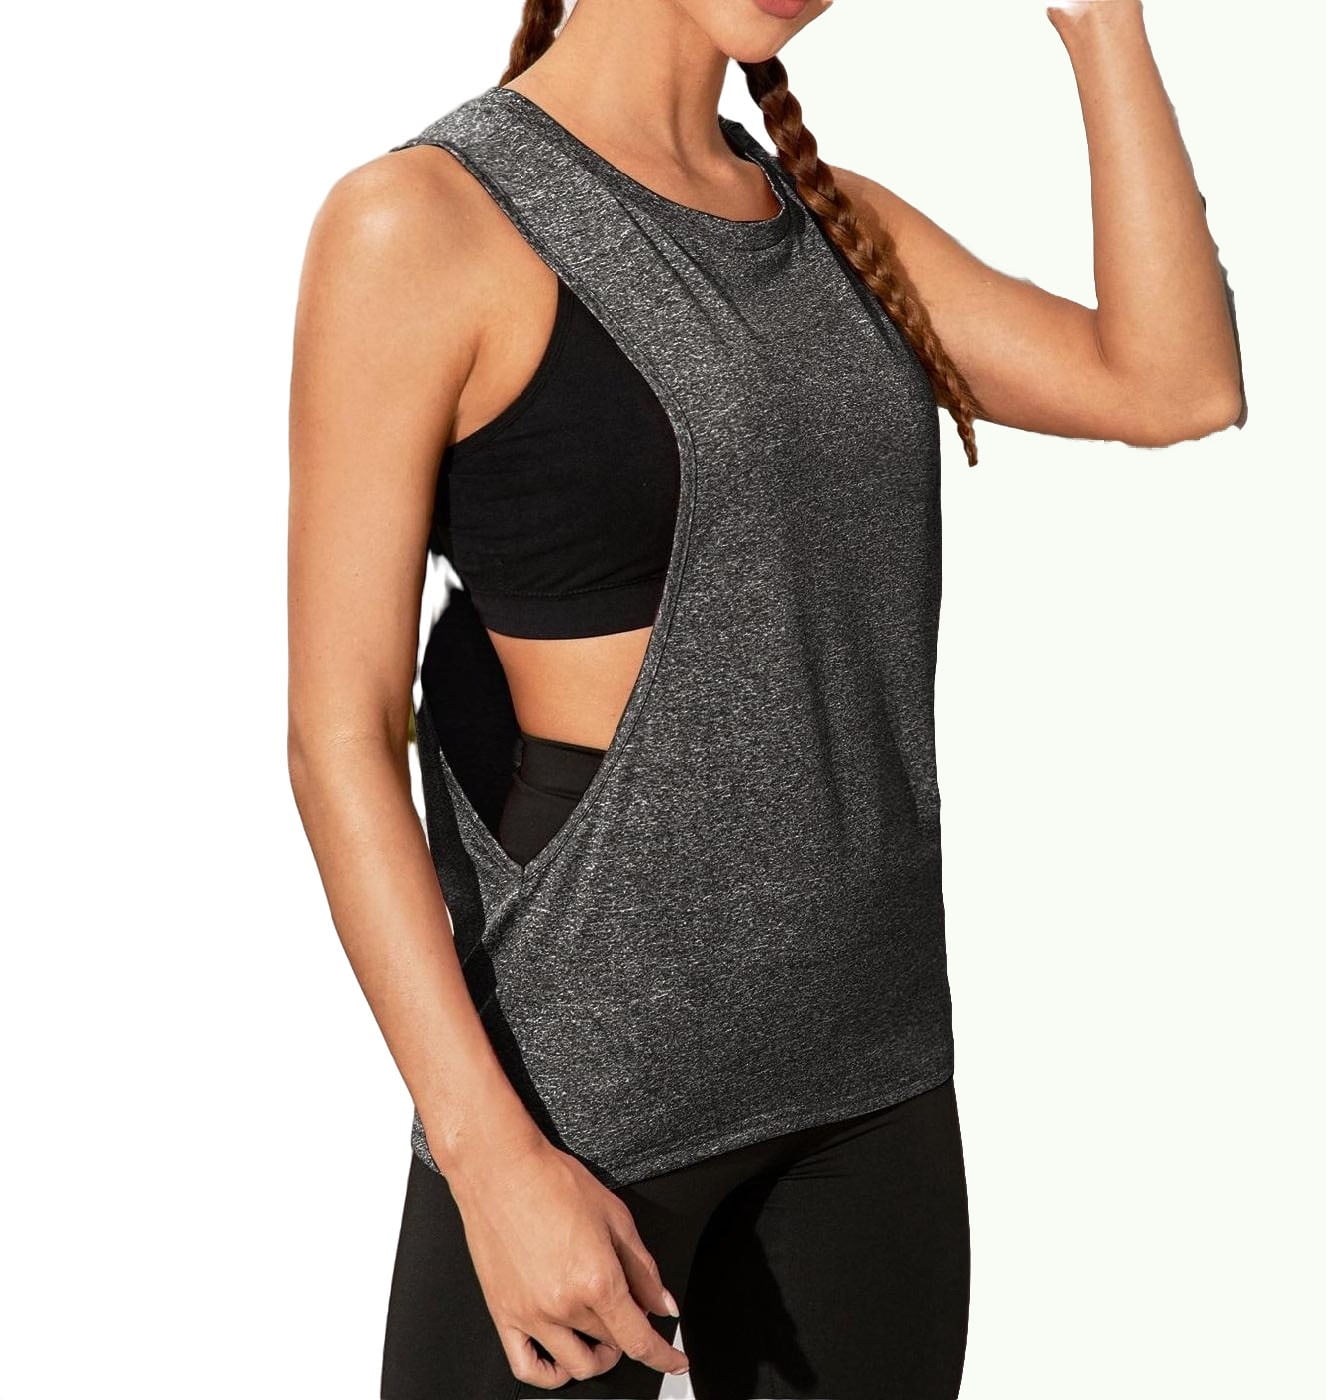 Women's Loose Fit Activewear Workout Tank Tops Drop Armhole Athletic Sports Running Yoga Tops Shirts XL(12) - Walmart.com